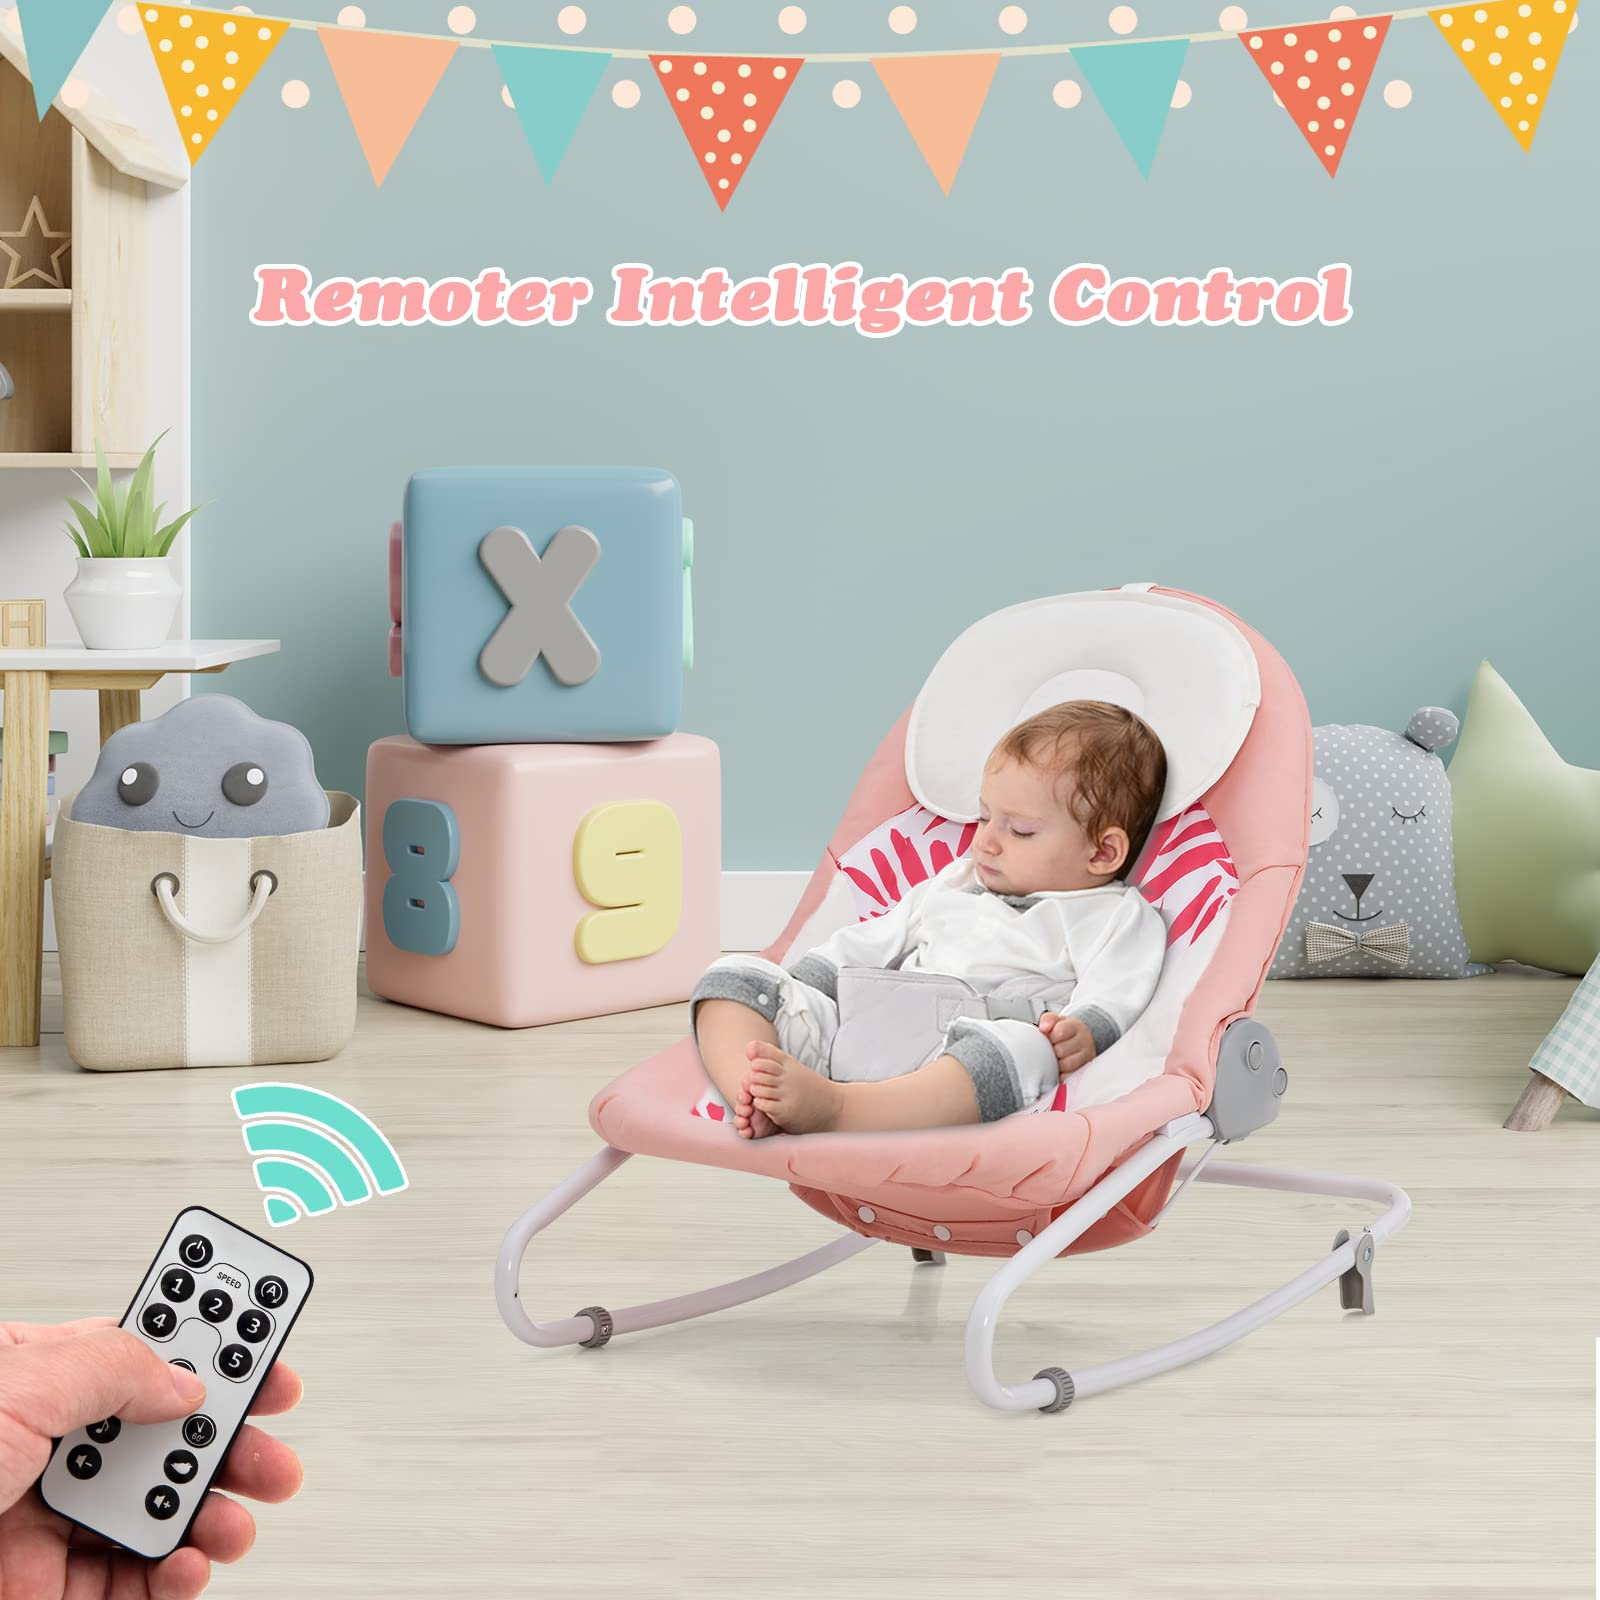 Baby Swing Bouncer Seat Chair for Infants, Electric Portable 2 in 1 Baby  Rocker for Newborn to Toddlers, 5 Speeds 3-Level Seat Angle Adjustment  Built